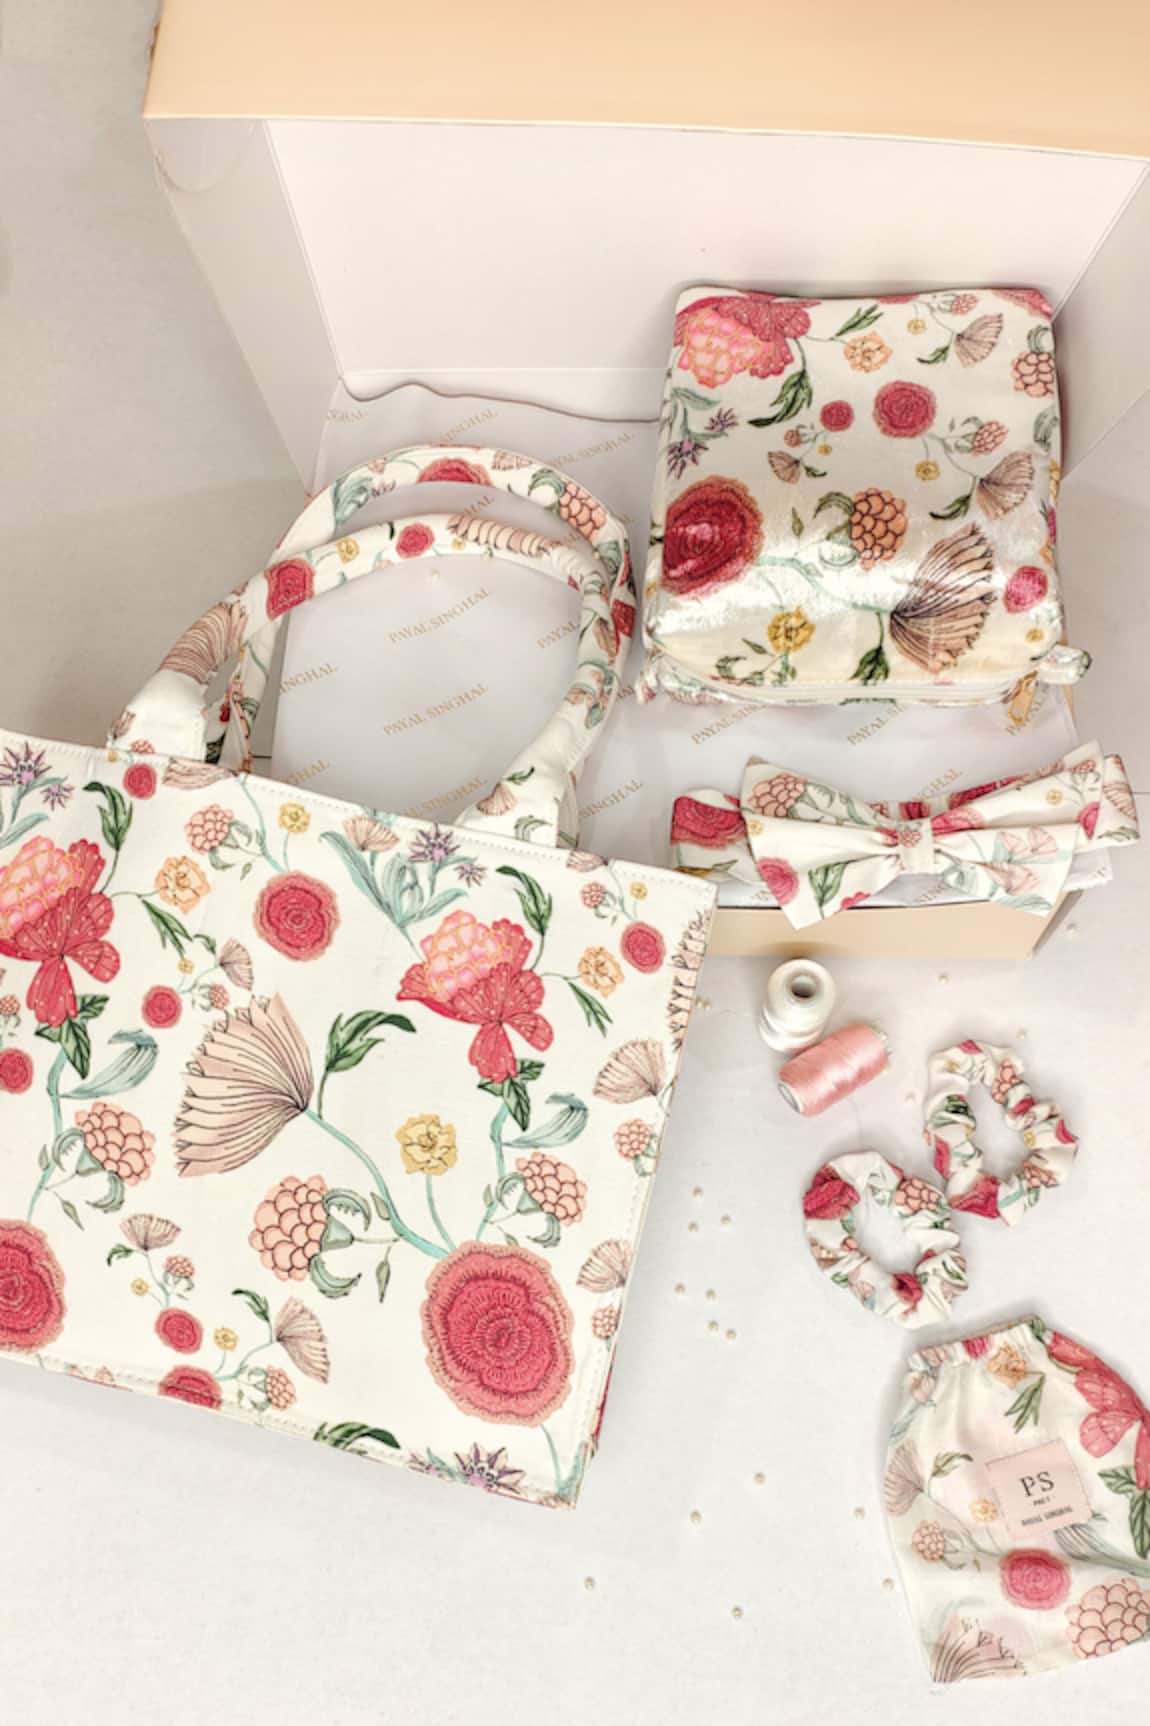 PS Accessories by Payal Singhal Gulbagh Flower Print Gift Hamper